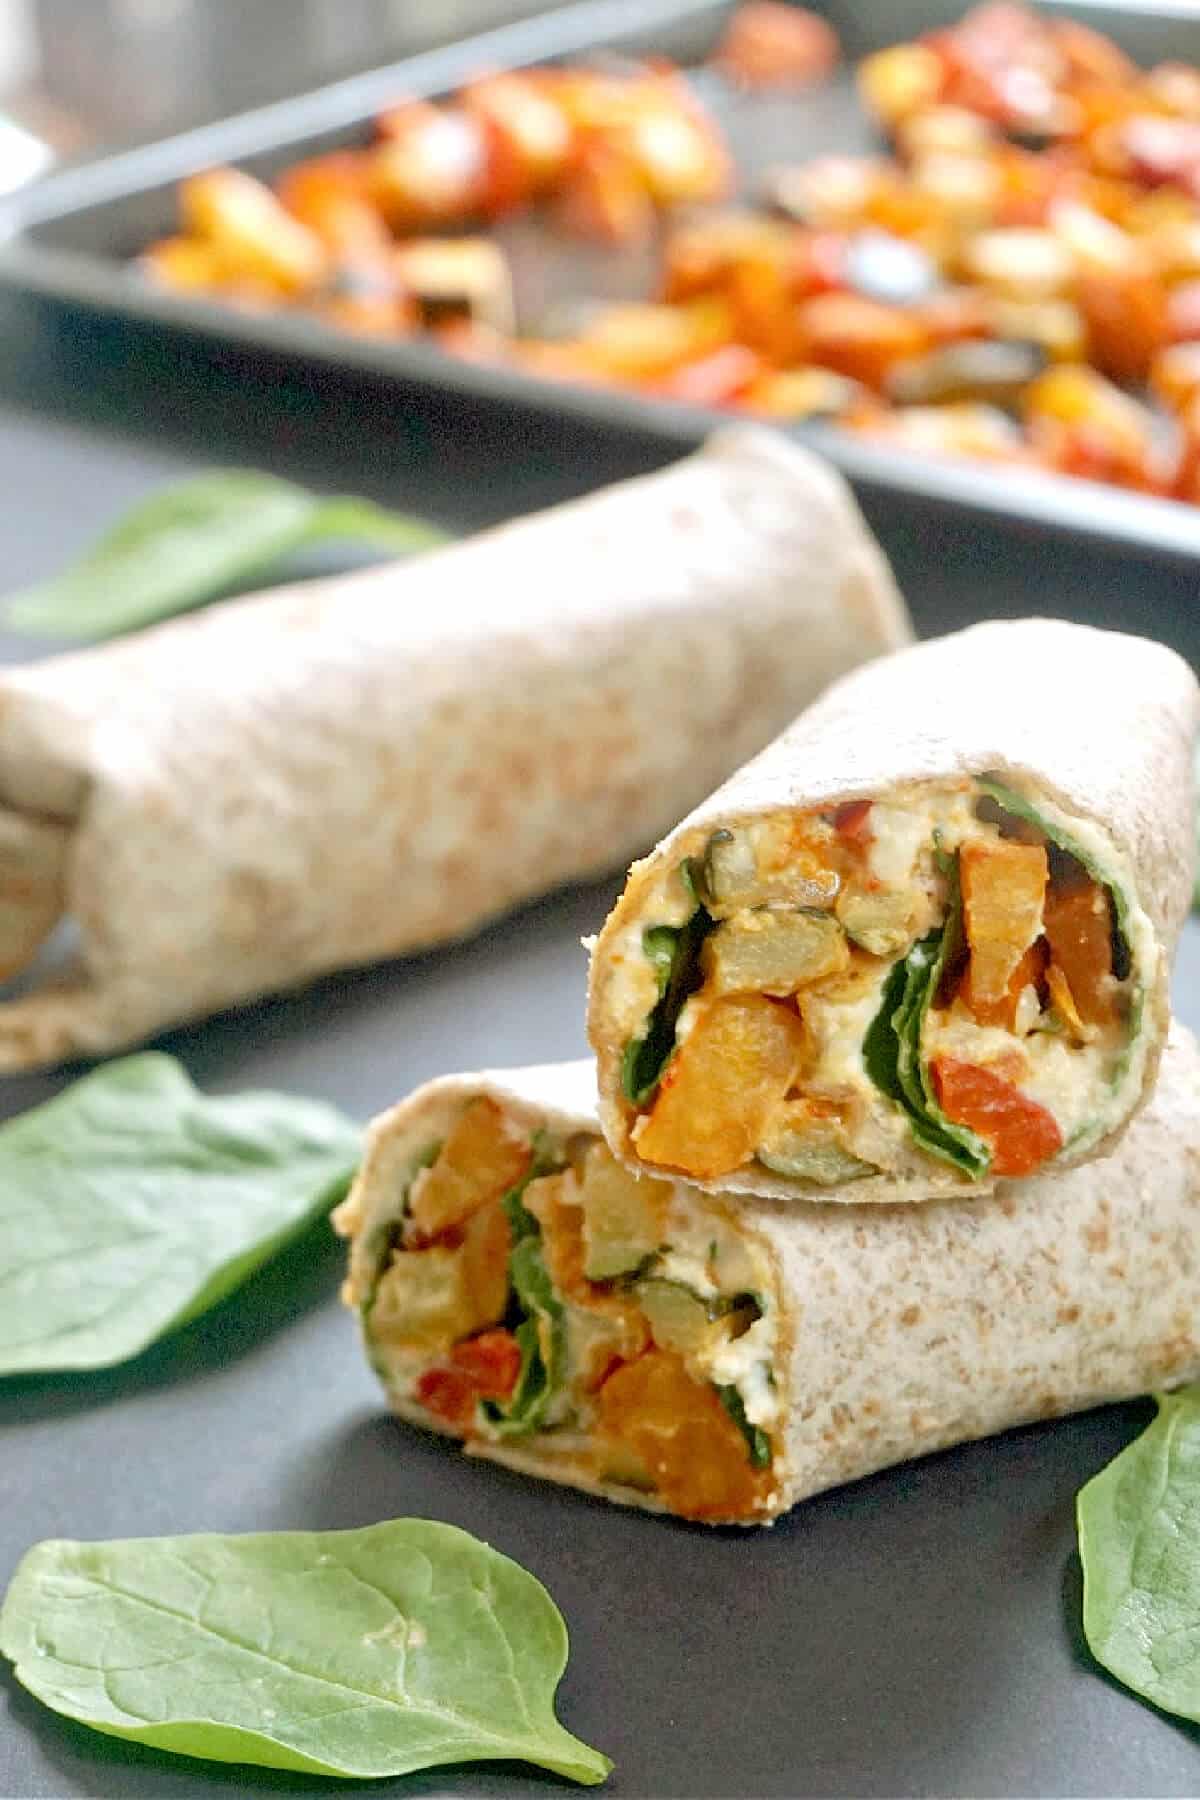 2 halves of a hummus wrap with another wrap in the background and a tray with veggies.